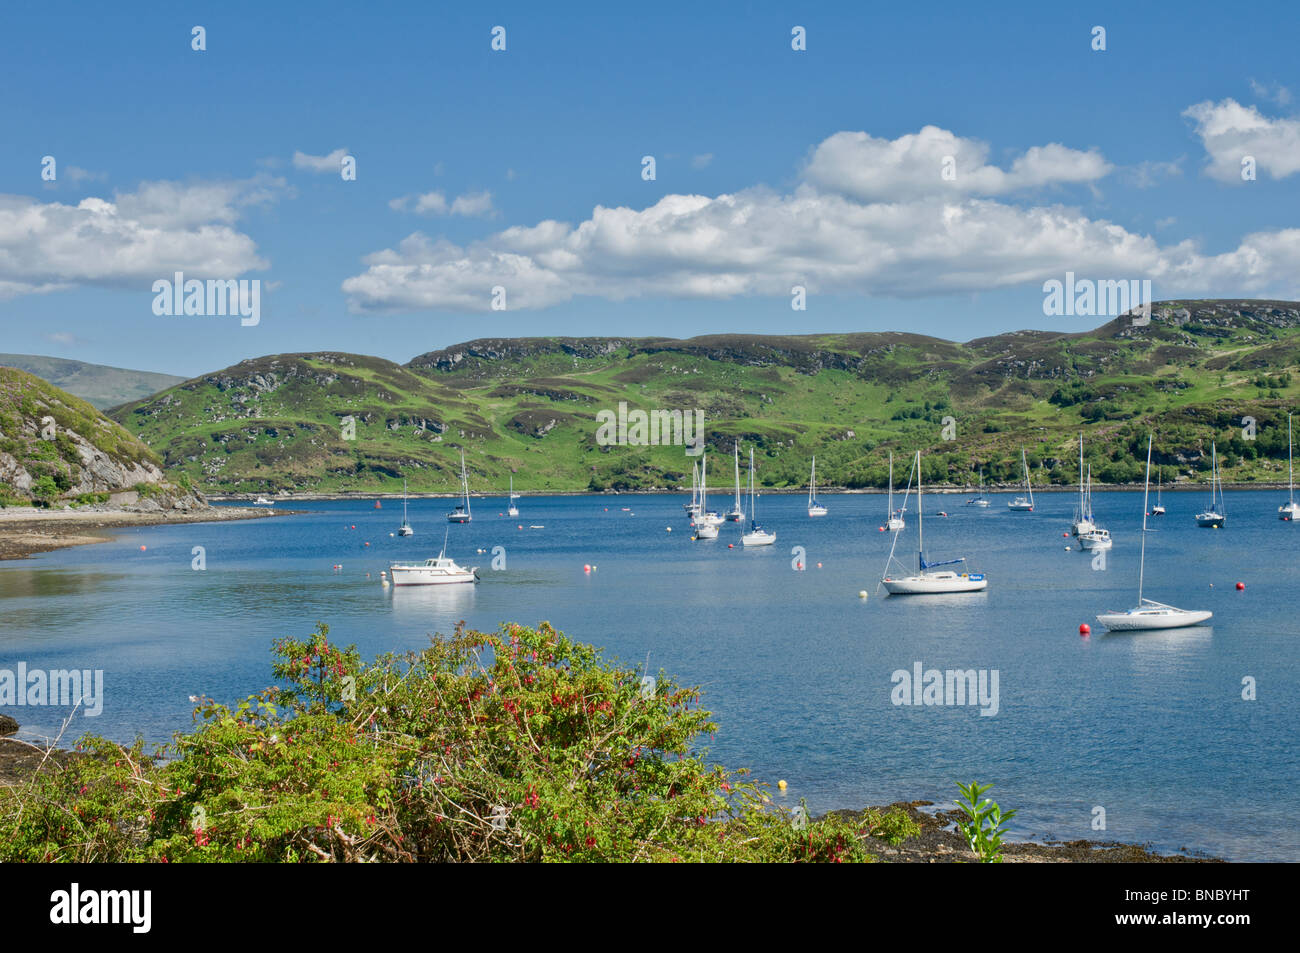 Yachts & boats in the Kyles of Bute at Tighnabruaich with Isle of Bute in background Argyll & BUte Scotland Stock Photo